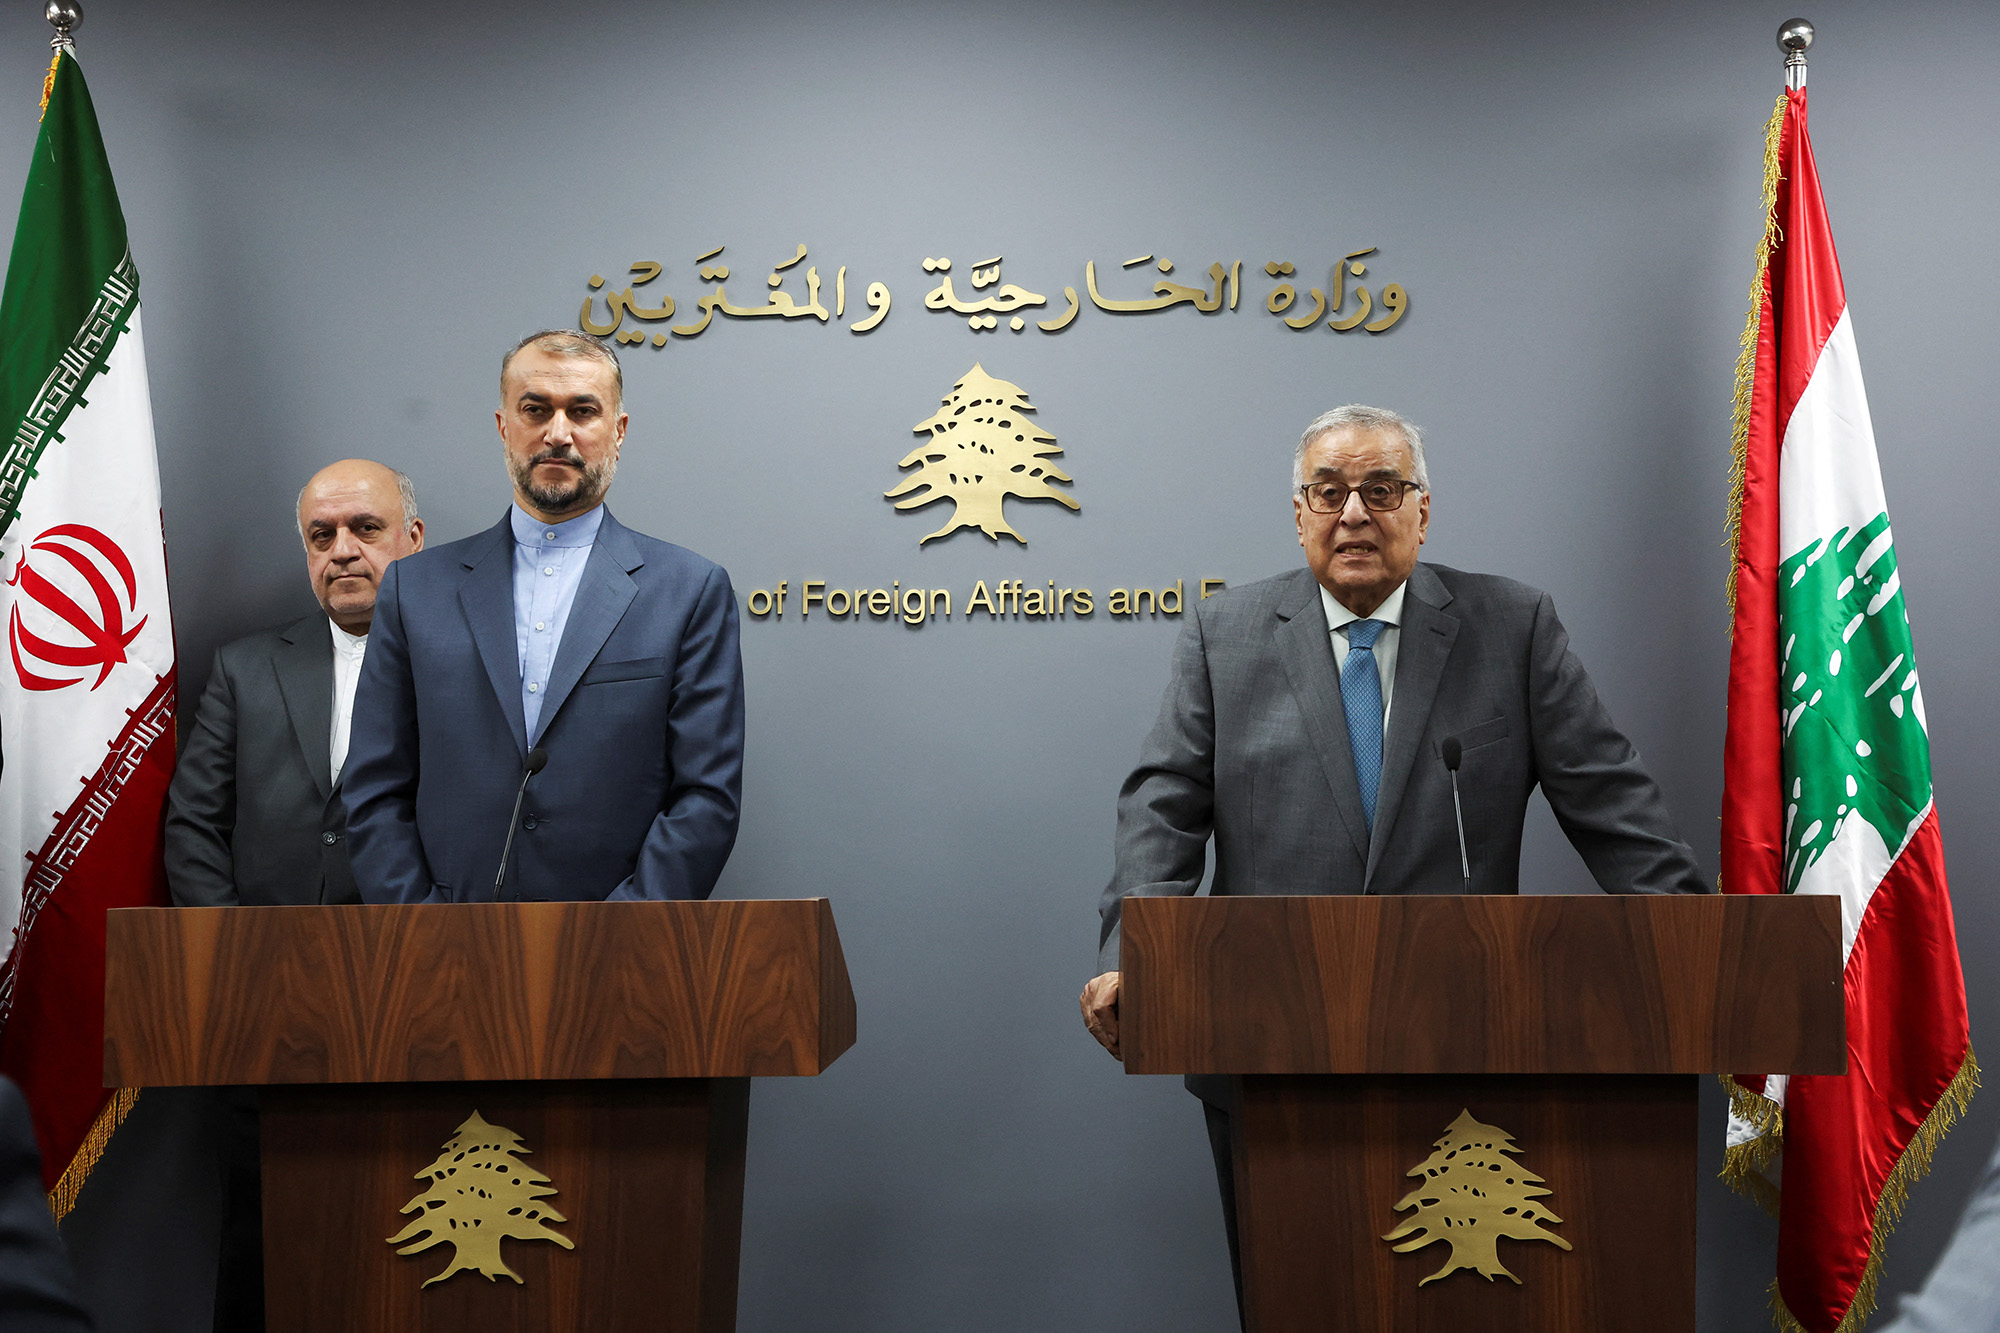 Lebanon's caretaker Foreign Minister Abdallah Bou Habib and Iranian Foreign Minister Hossein Amirabdollahian attend a joint press conference in Beirut, Lebanon, on October 13.